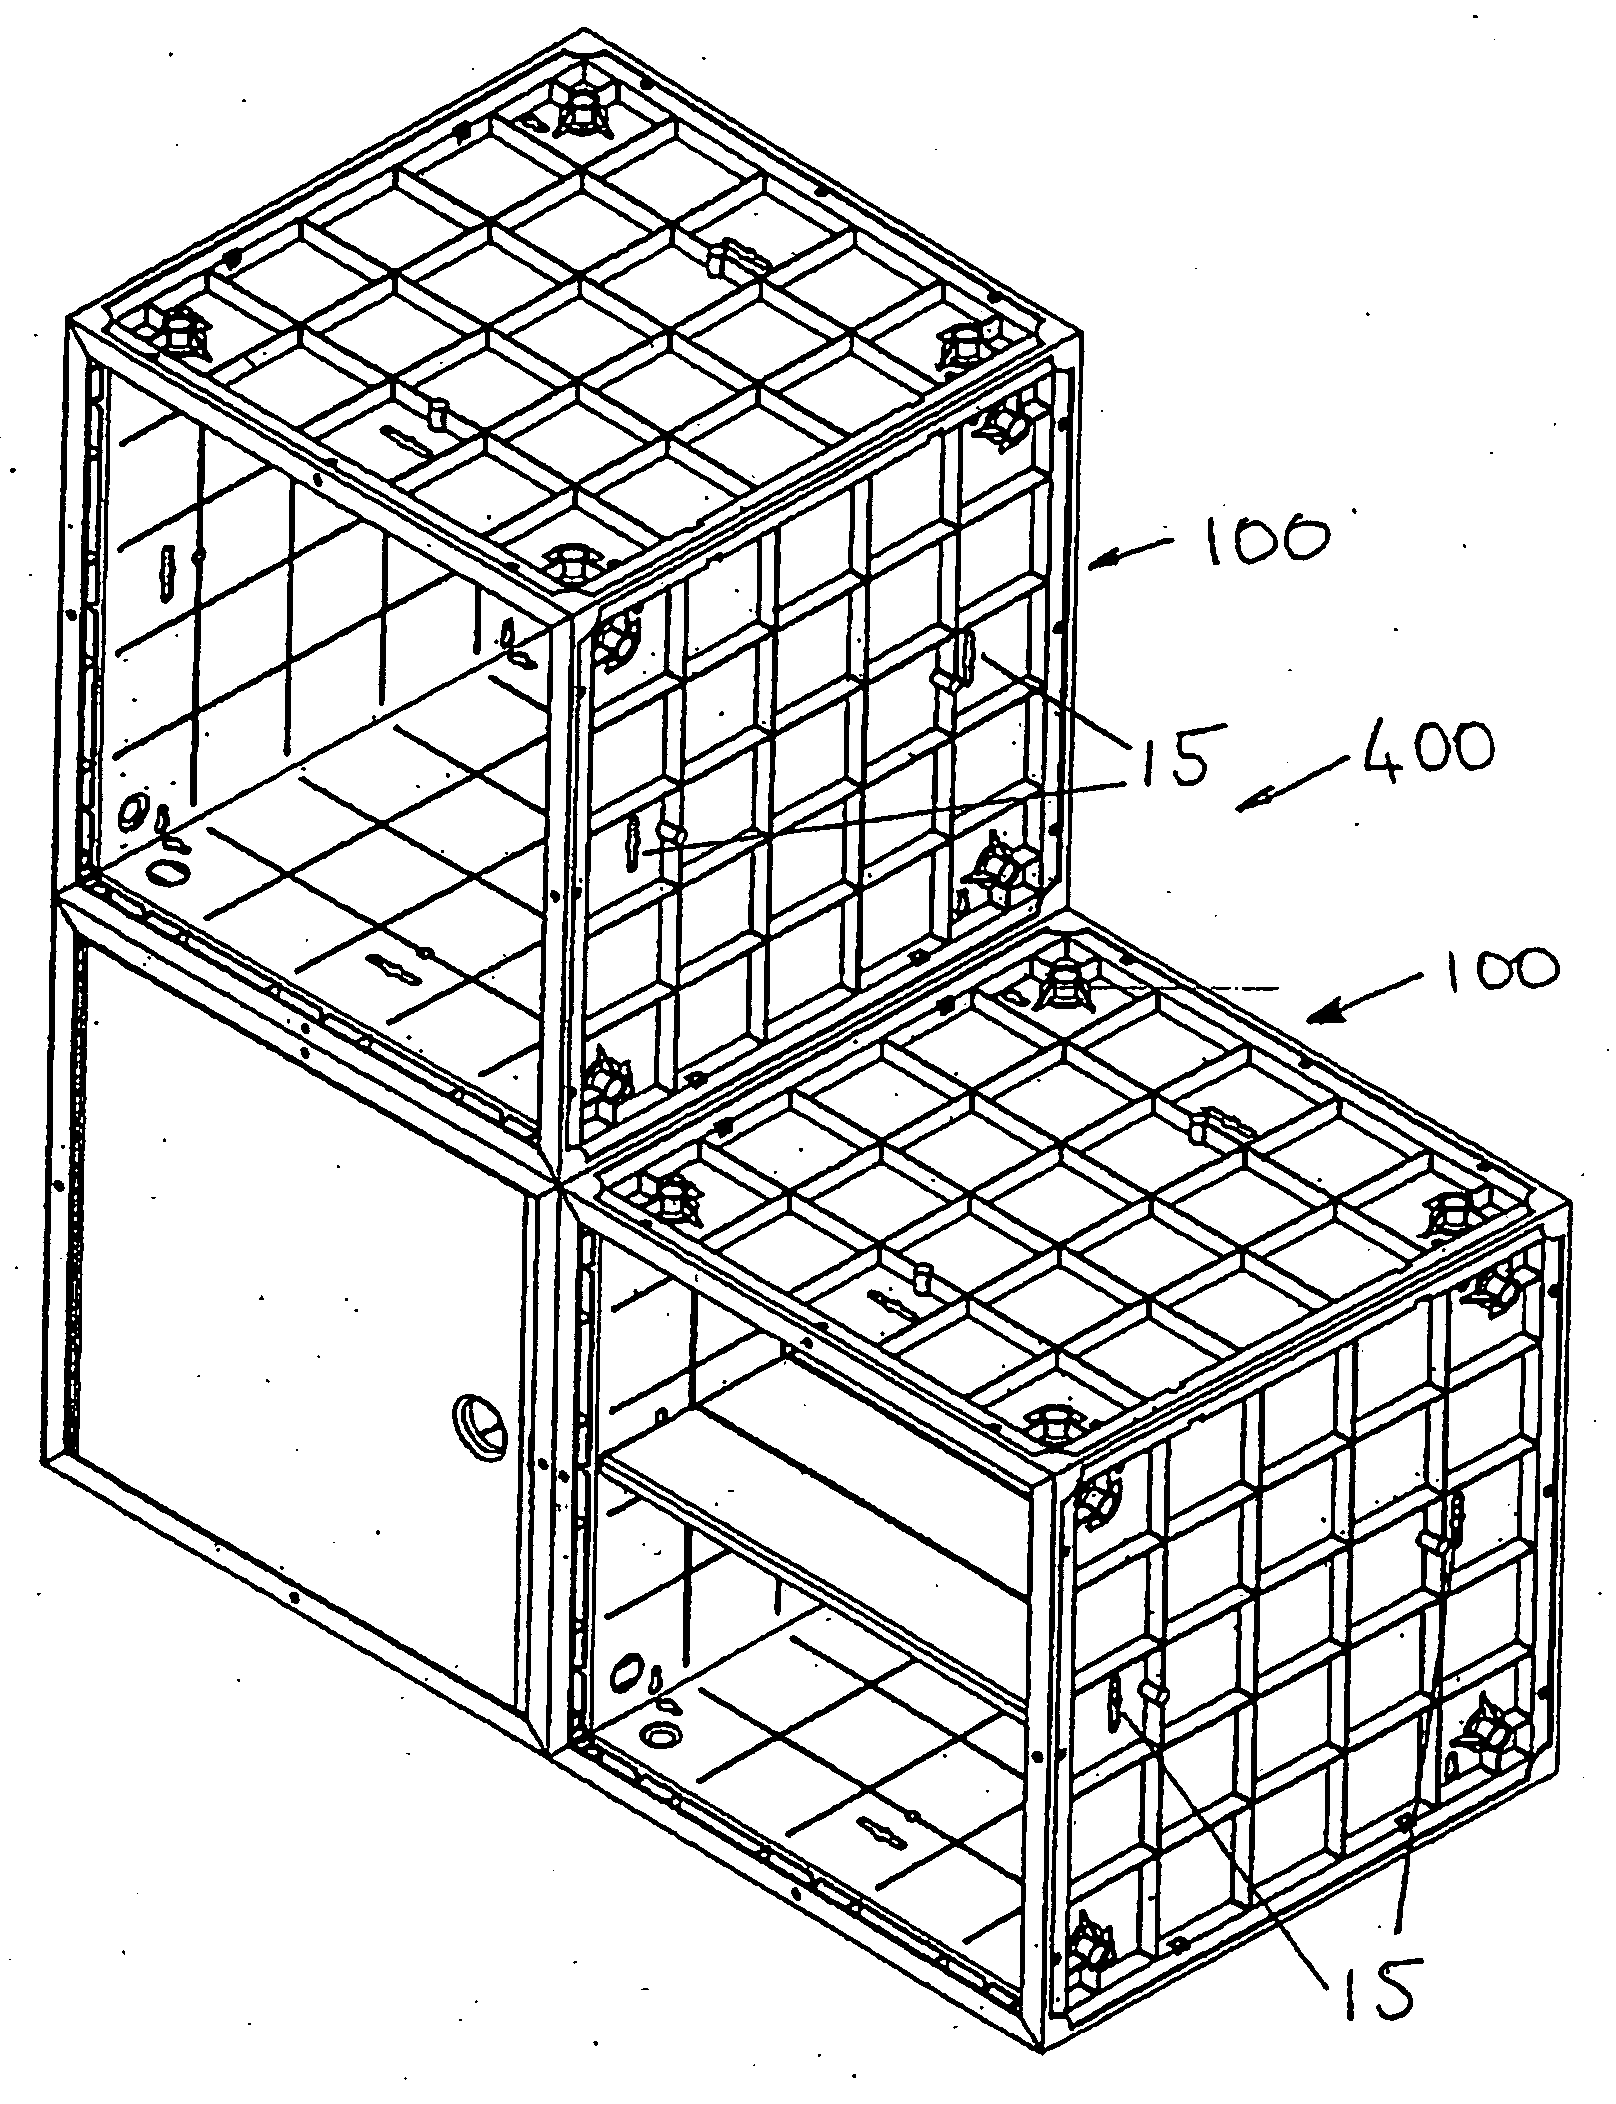 Modular furniture subassembly, component therefor and method of assembling a modular furniture subassembly